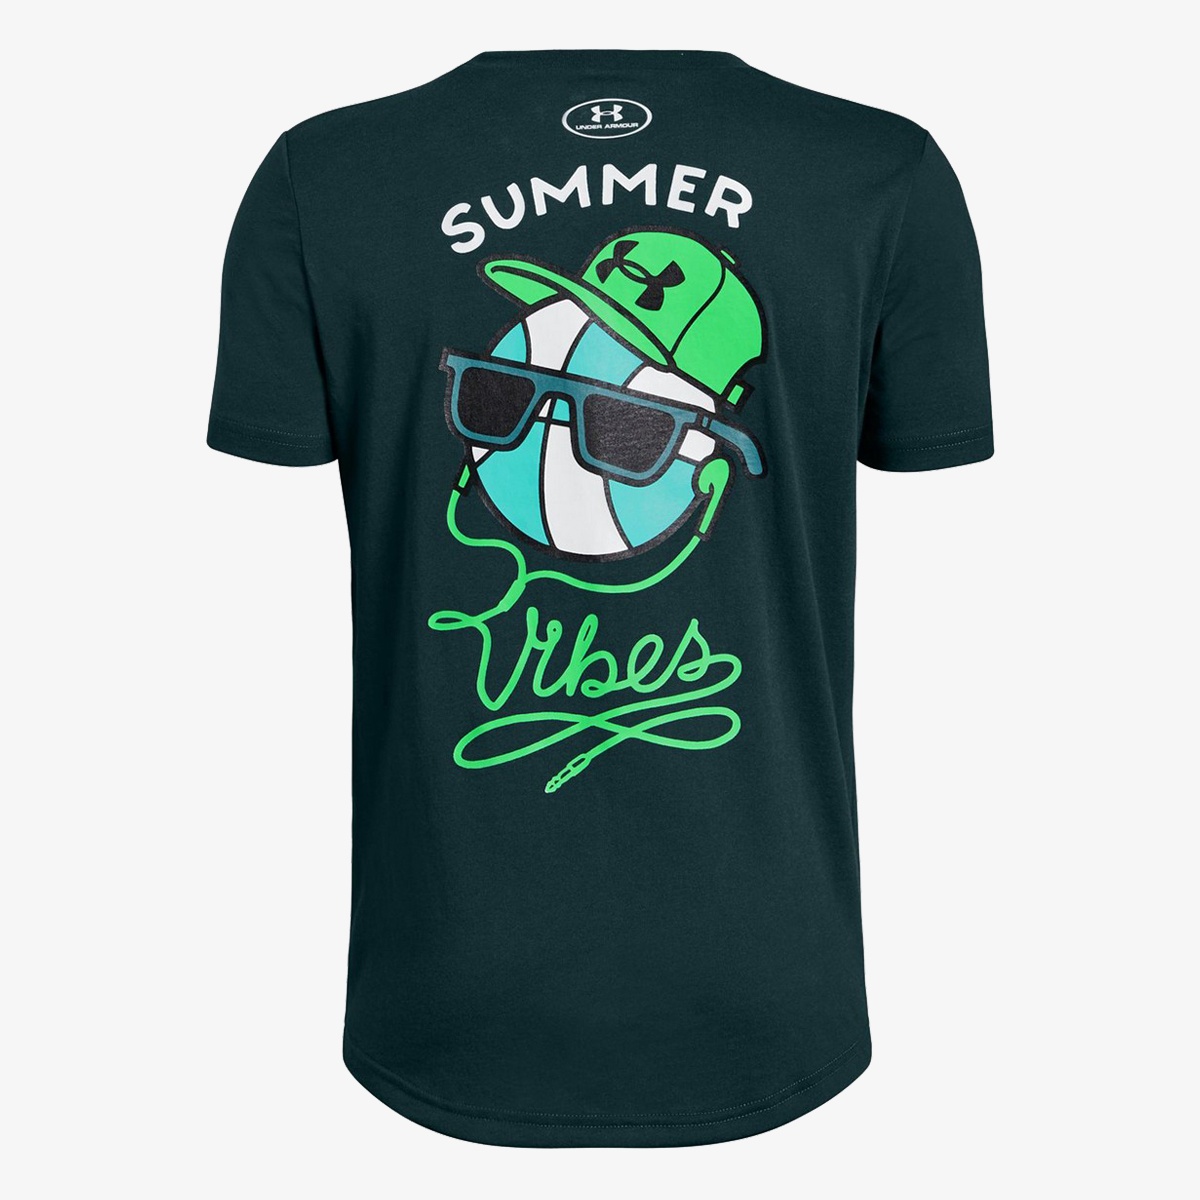 Under Armour Summer Vibes SS 